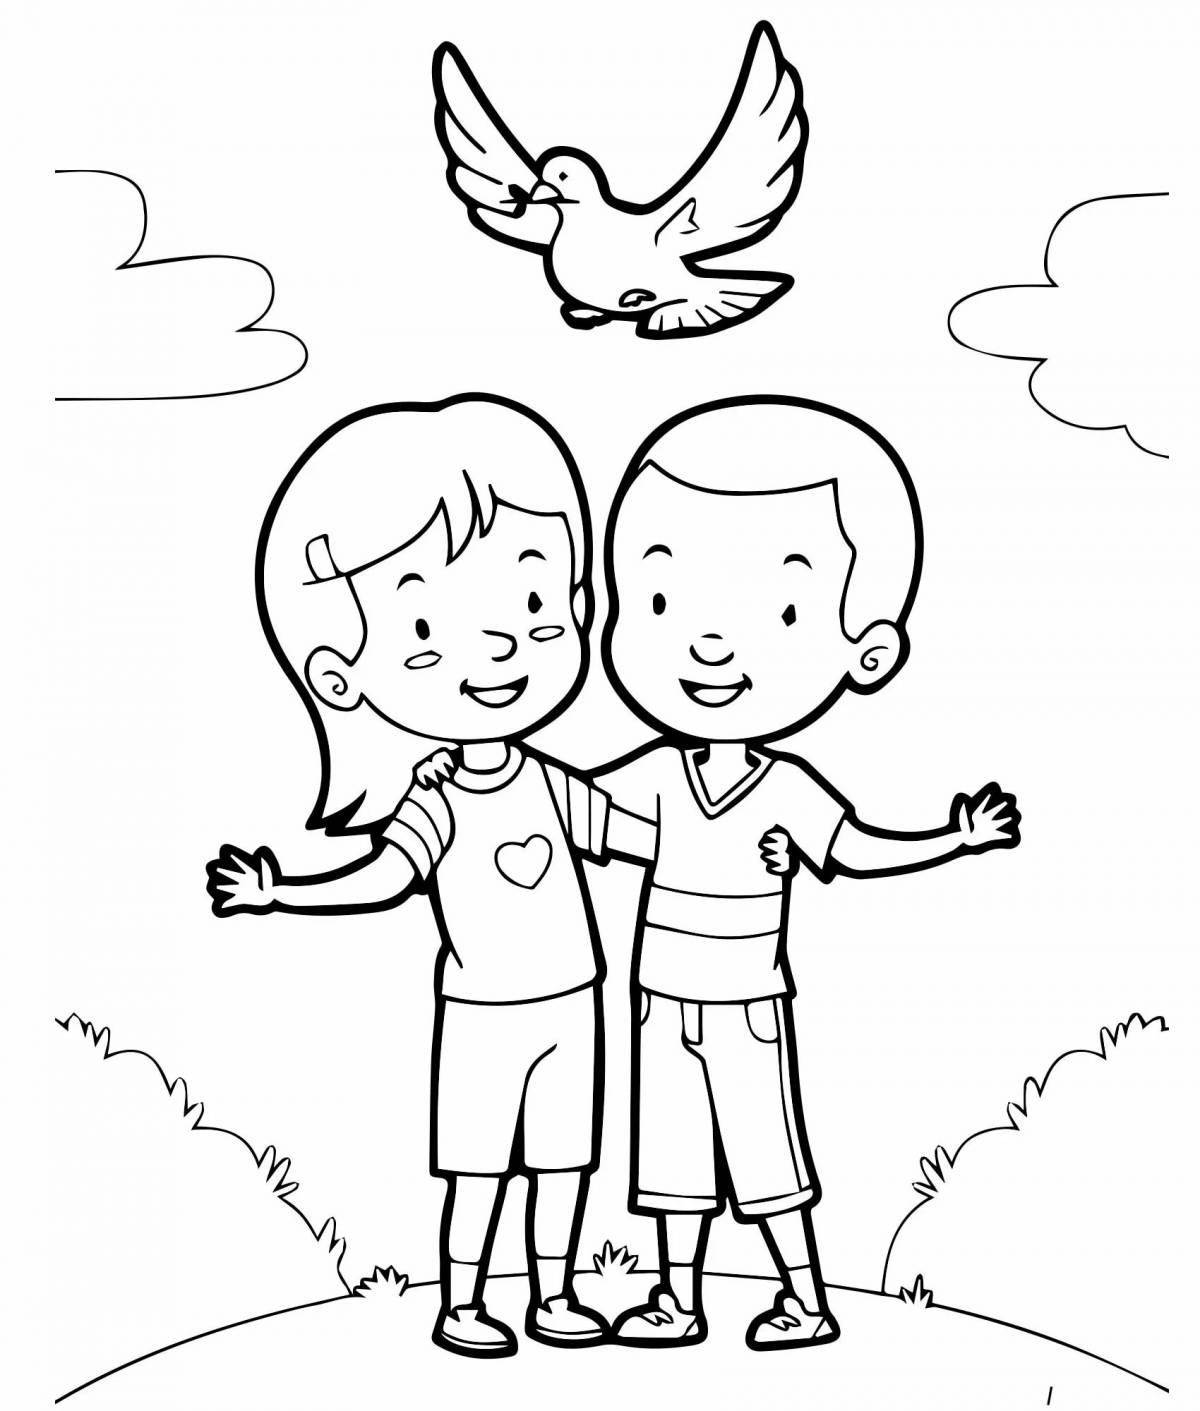 Radiant gosh and peace coloring page